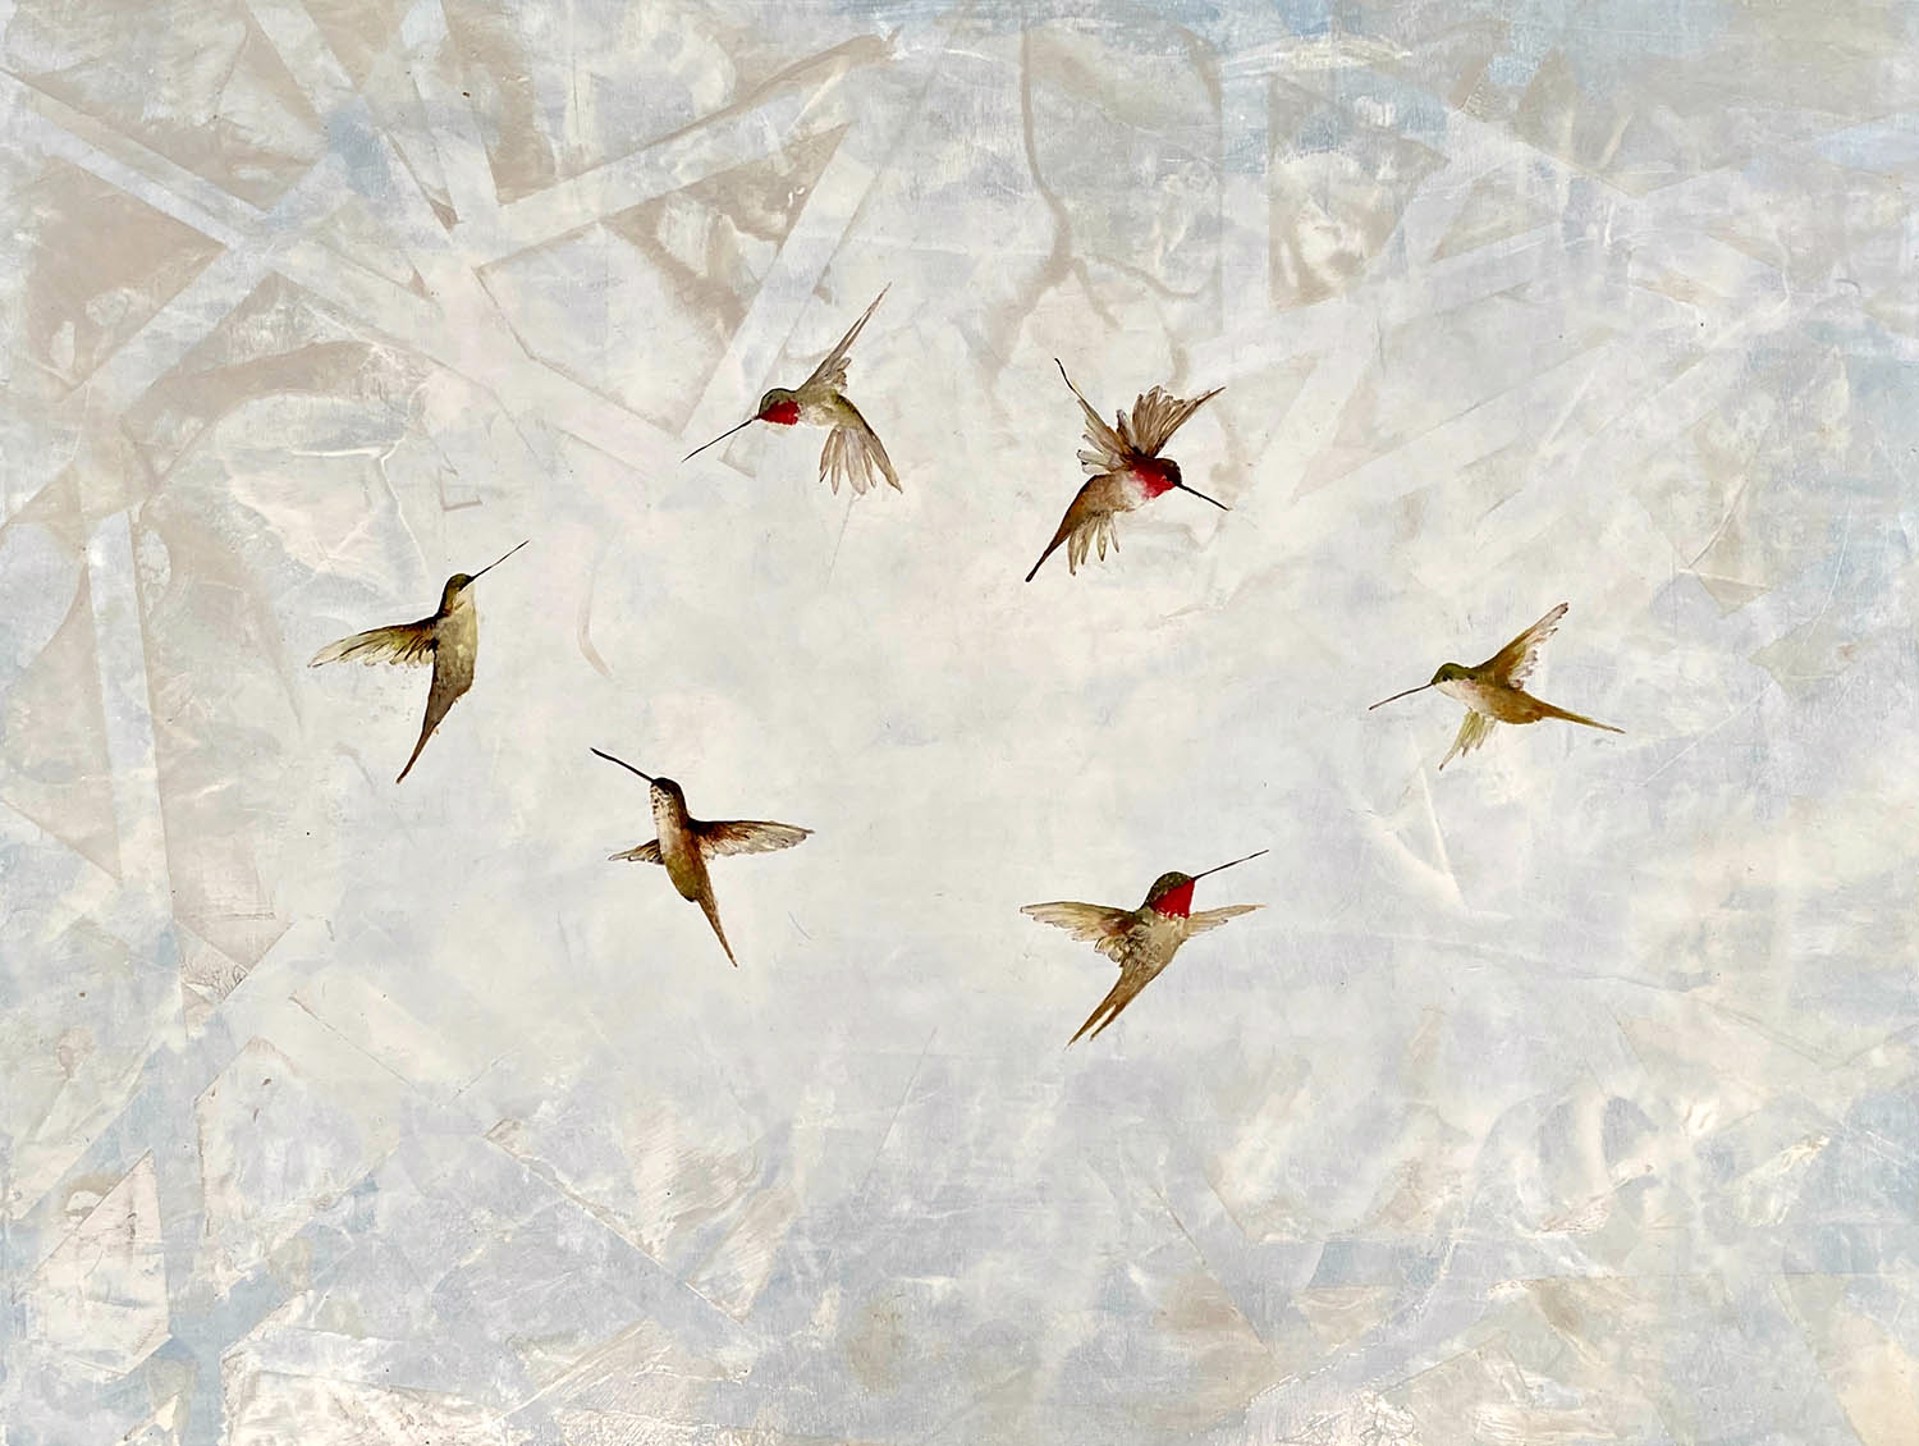 Original Oil Painting By Jenna Von Benedikt Featuring Ruby Throated Hummingbirds In Clustered Flight Over Abstract Silver Background